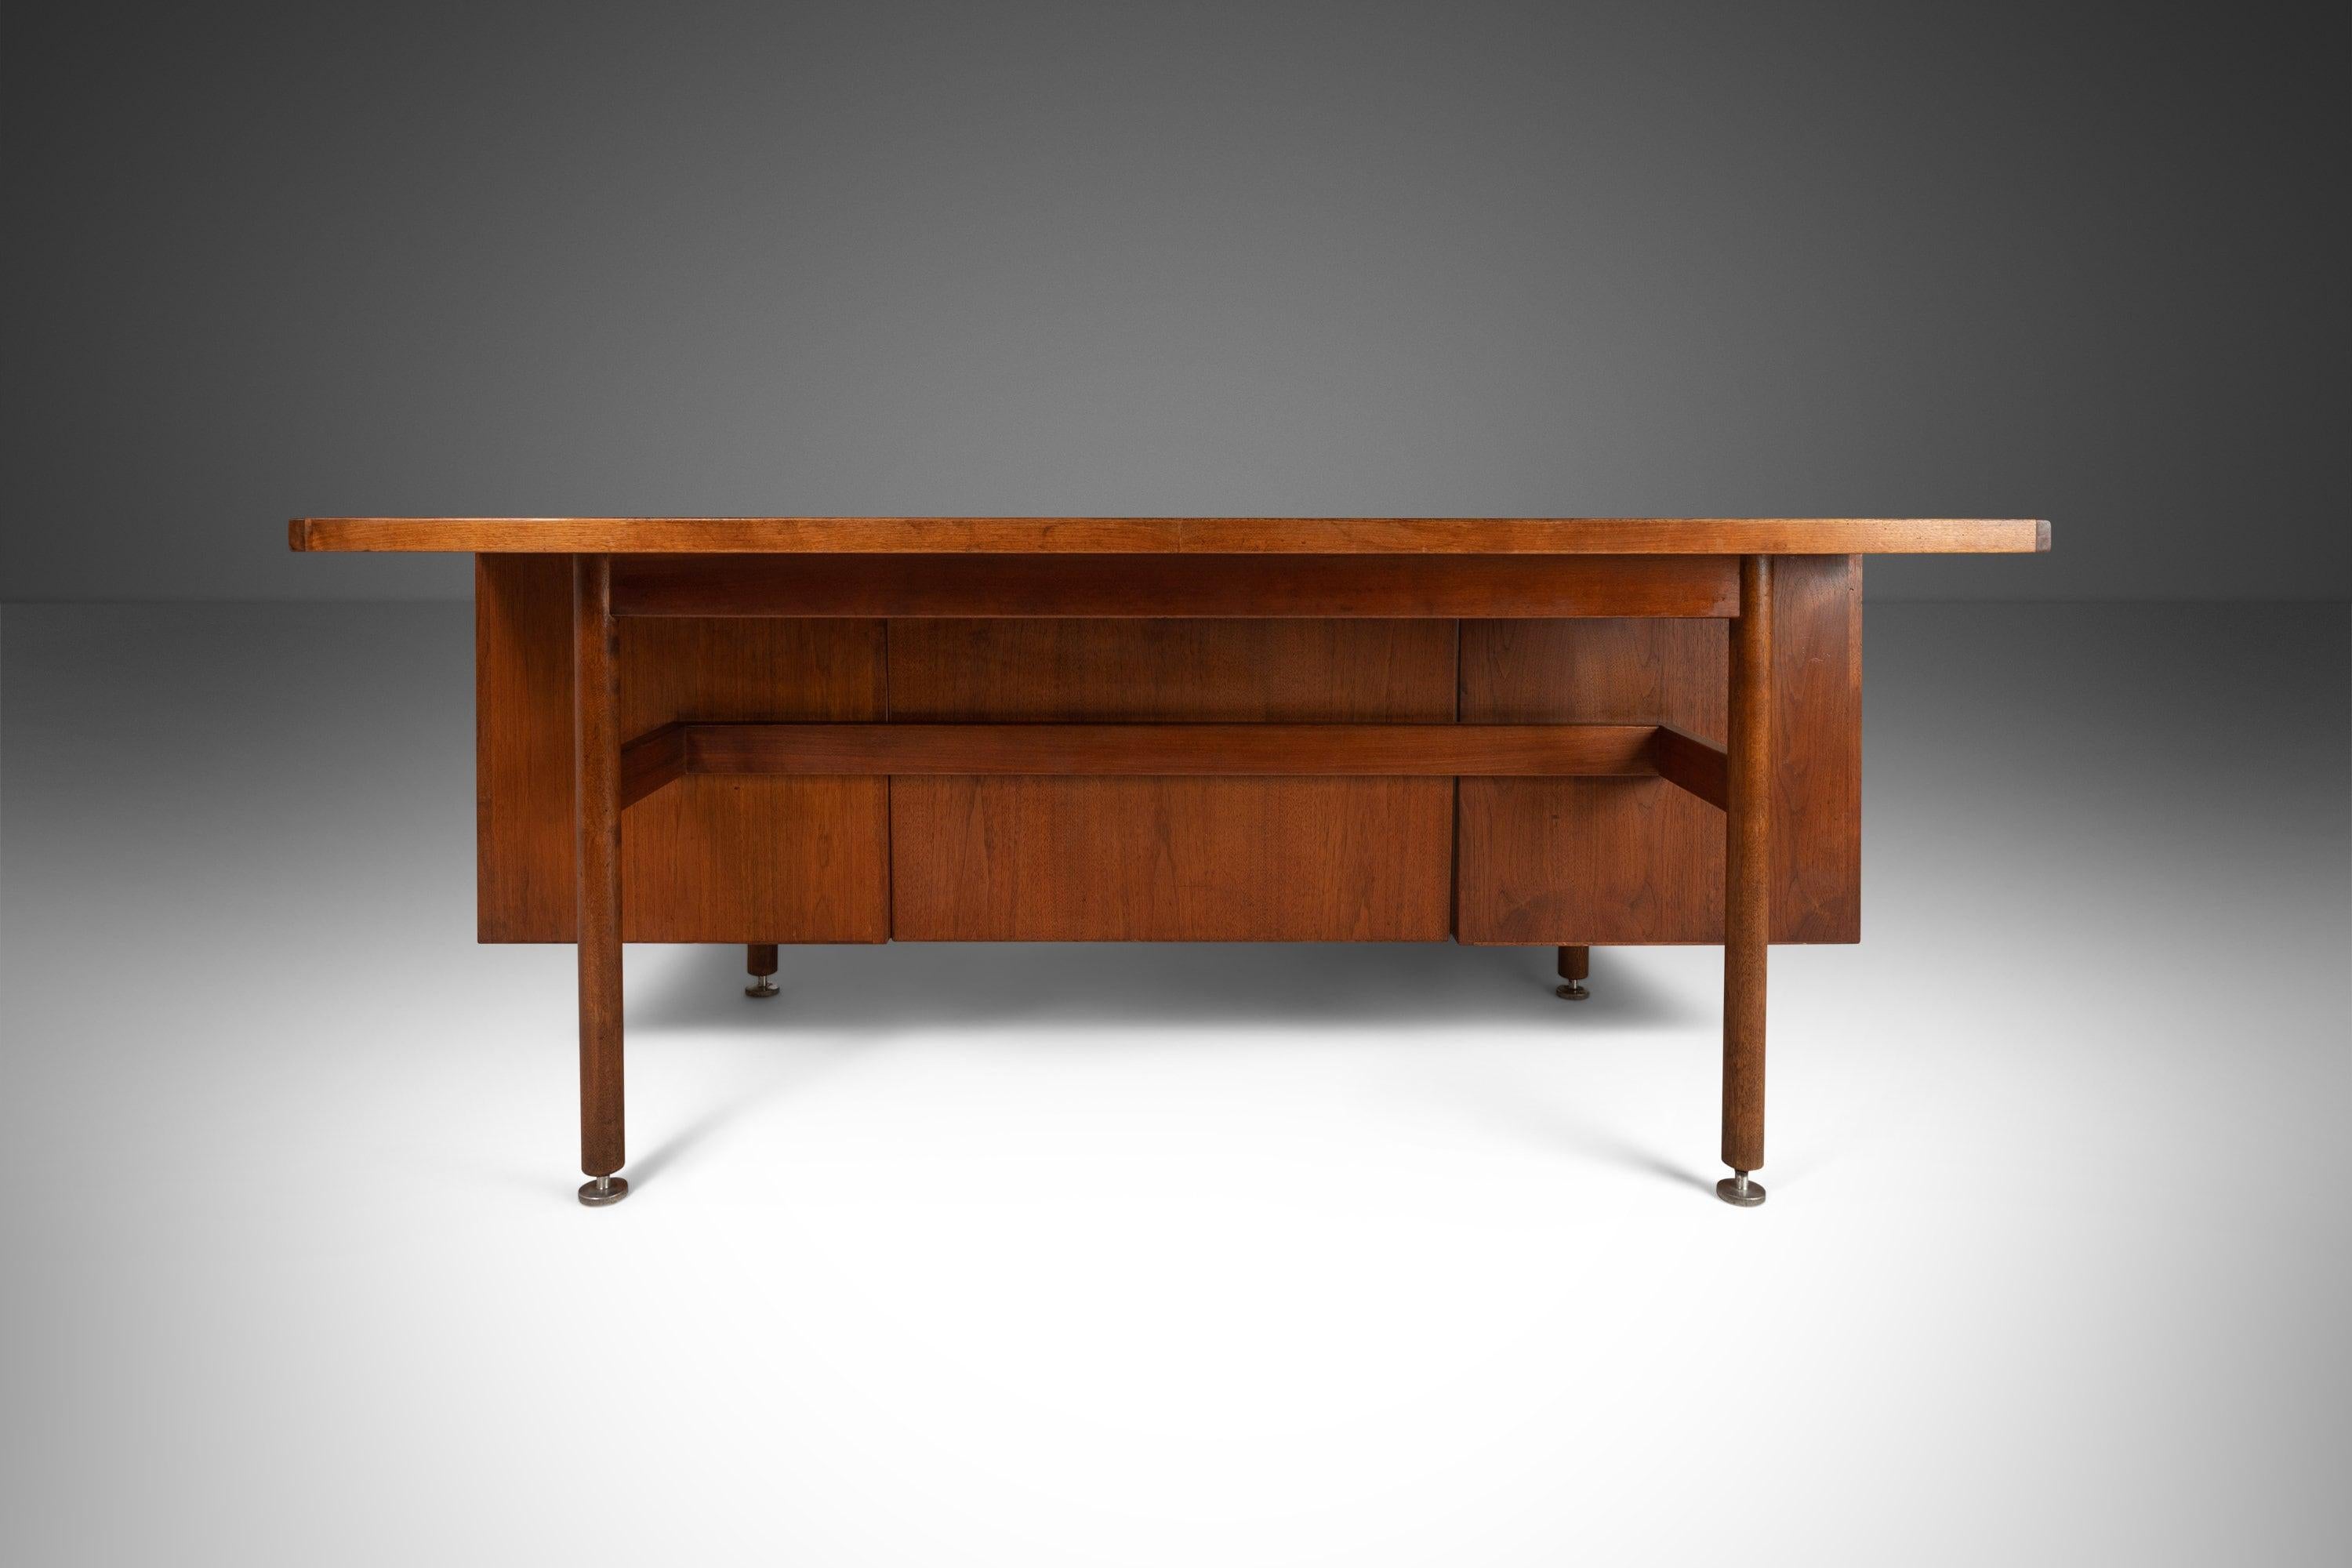 American Mid-Century Modern Executive Desk with Return in Walnut by Jens Risom, USA